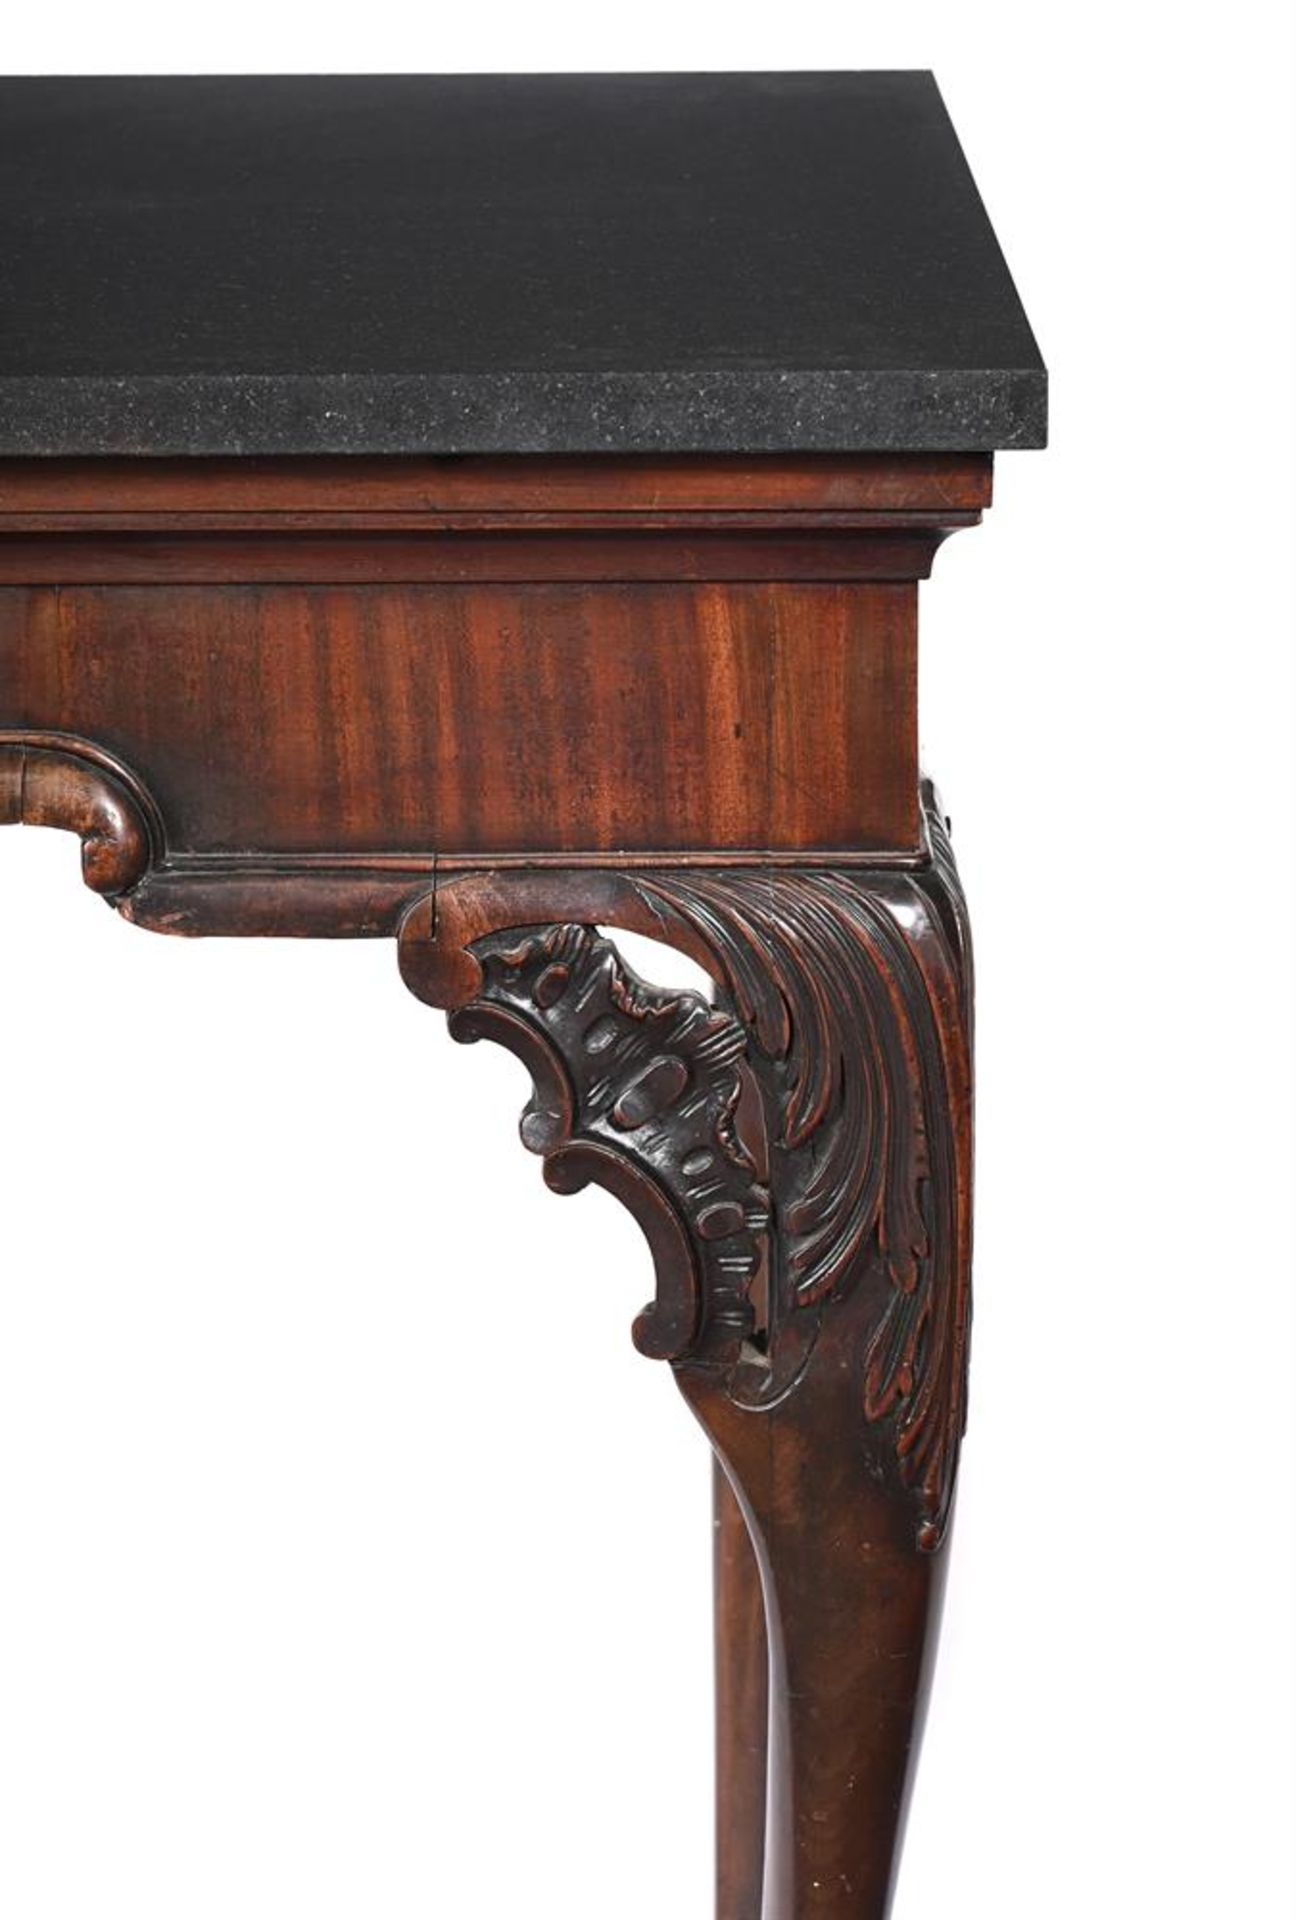 A GEORGE III MAHOGANY SERVING TABLE, CIRCA 1760 - Image 3 of 3